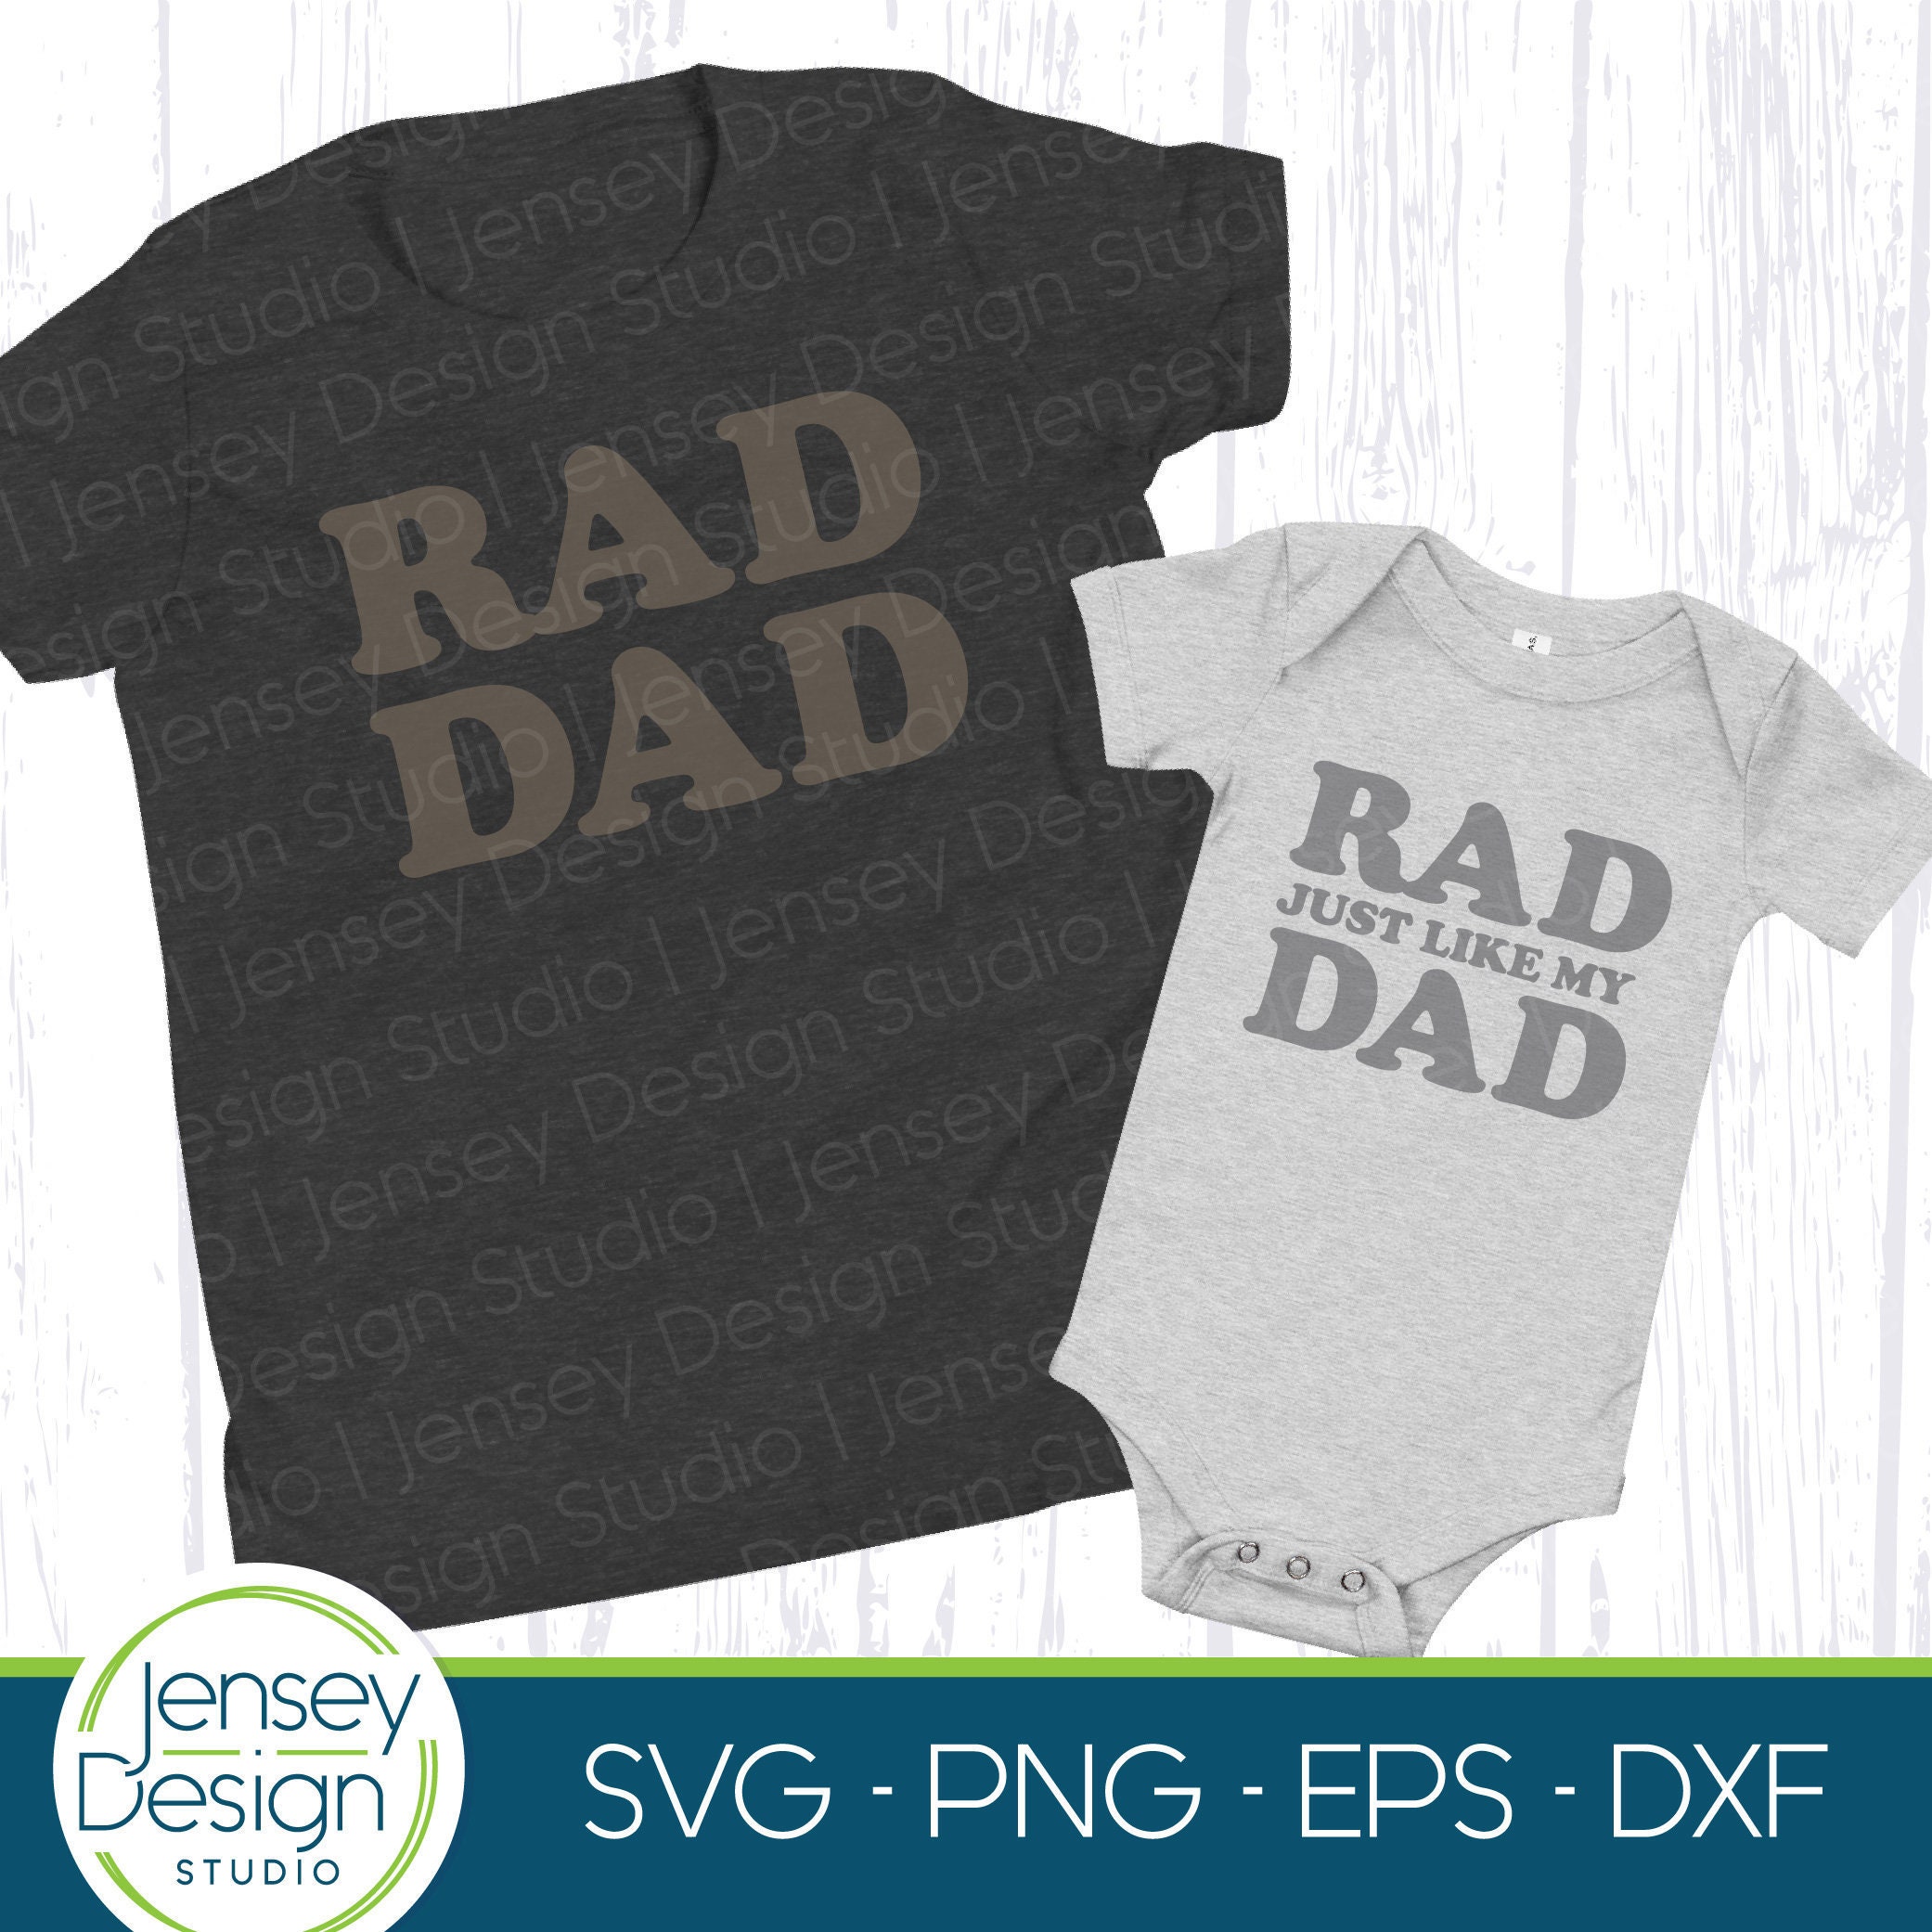 Daddy and Me svg Father Son Matching Shirts svg Rad Dad svg | Etsy